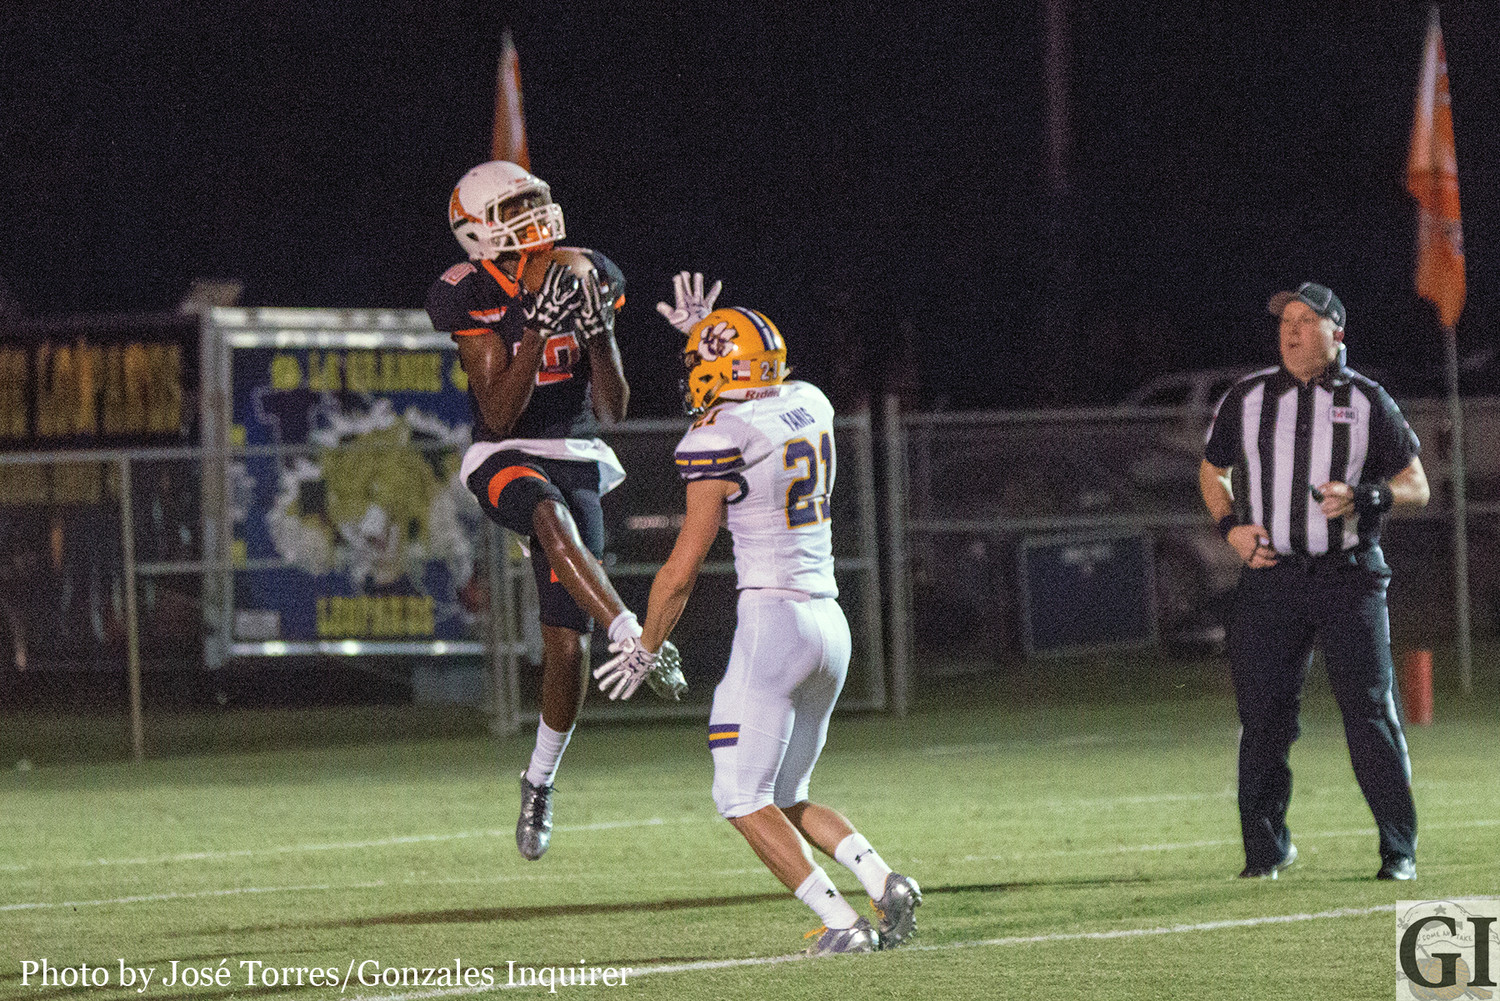 Trevion McNeil (10) snags a touchdown. He caught two touchdown passes in Gonzales' 23-13 win over La Grange